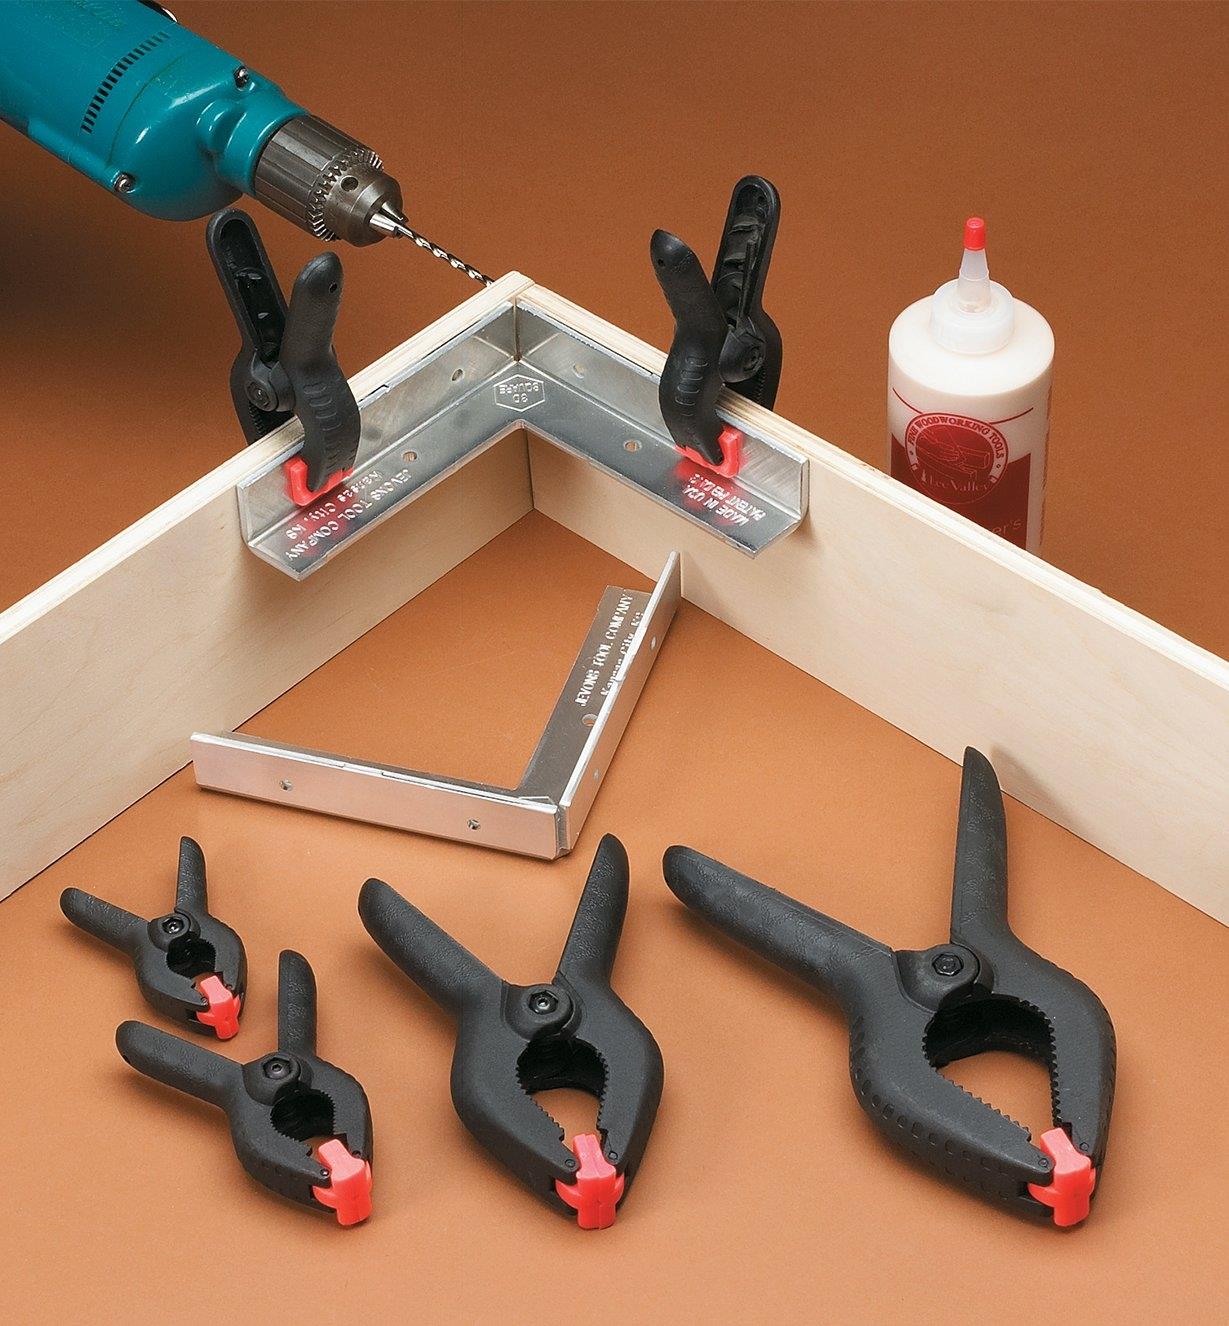 Plastic Spring Clamps used to clamp a corner joint